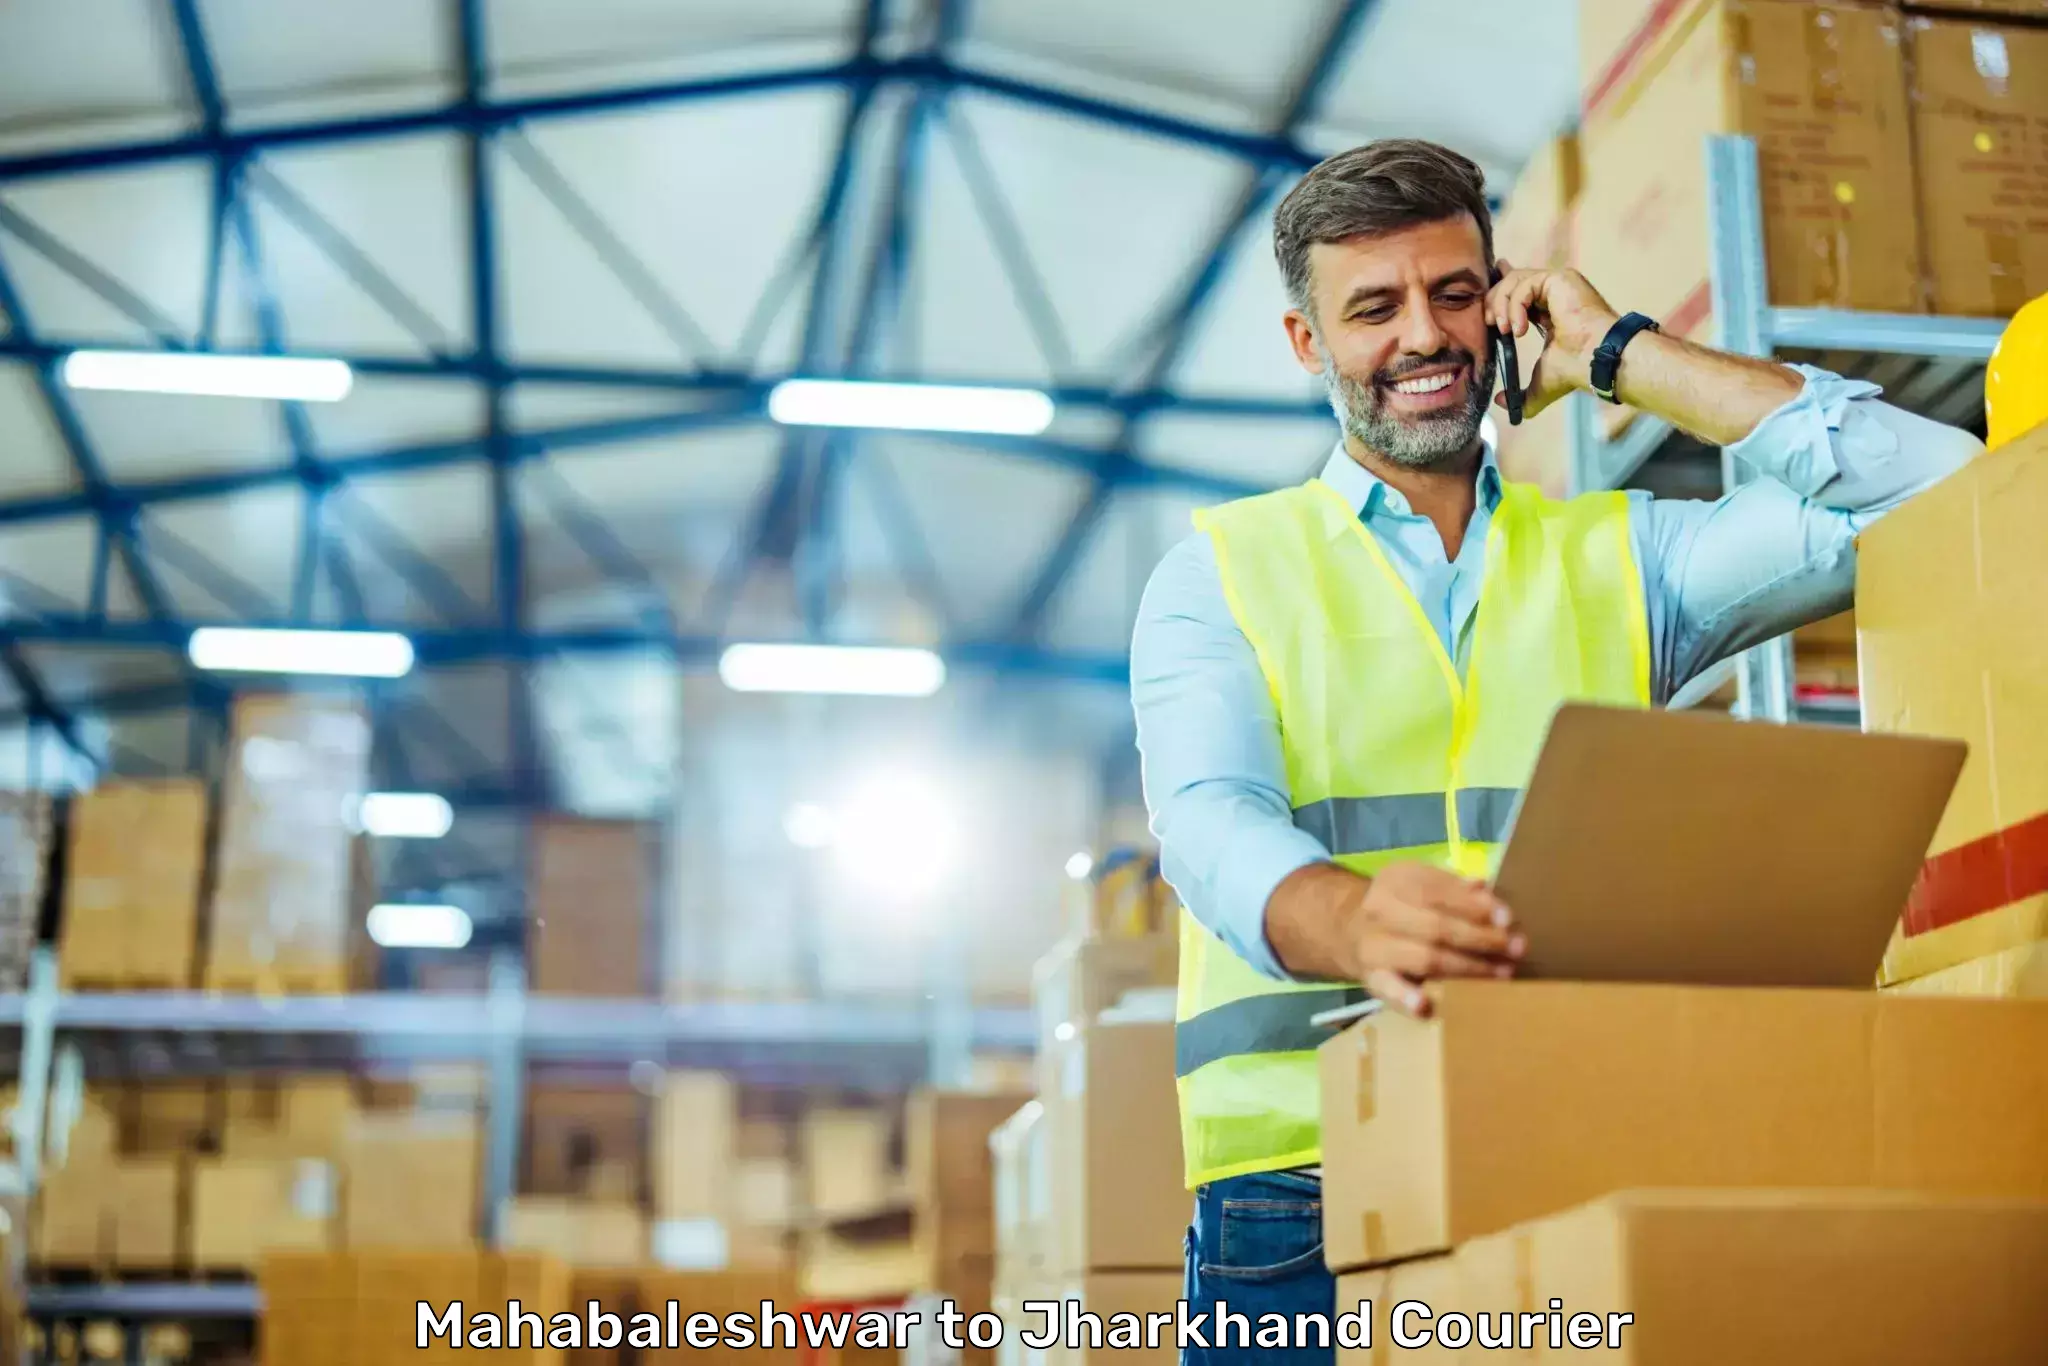 On-call courier service Mahabaleshwar to Deoghar